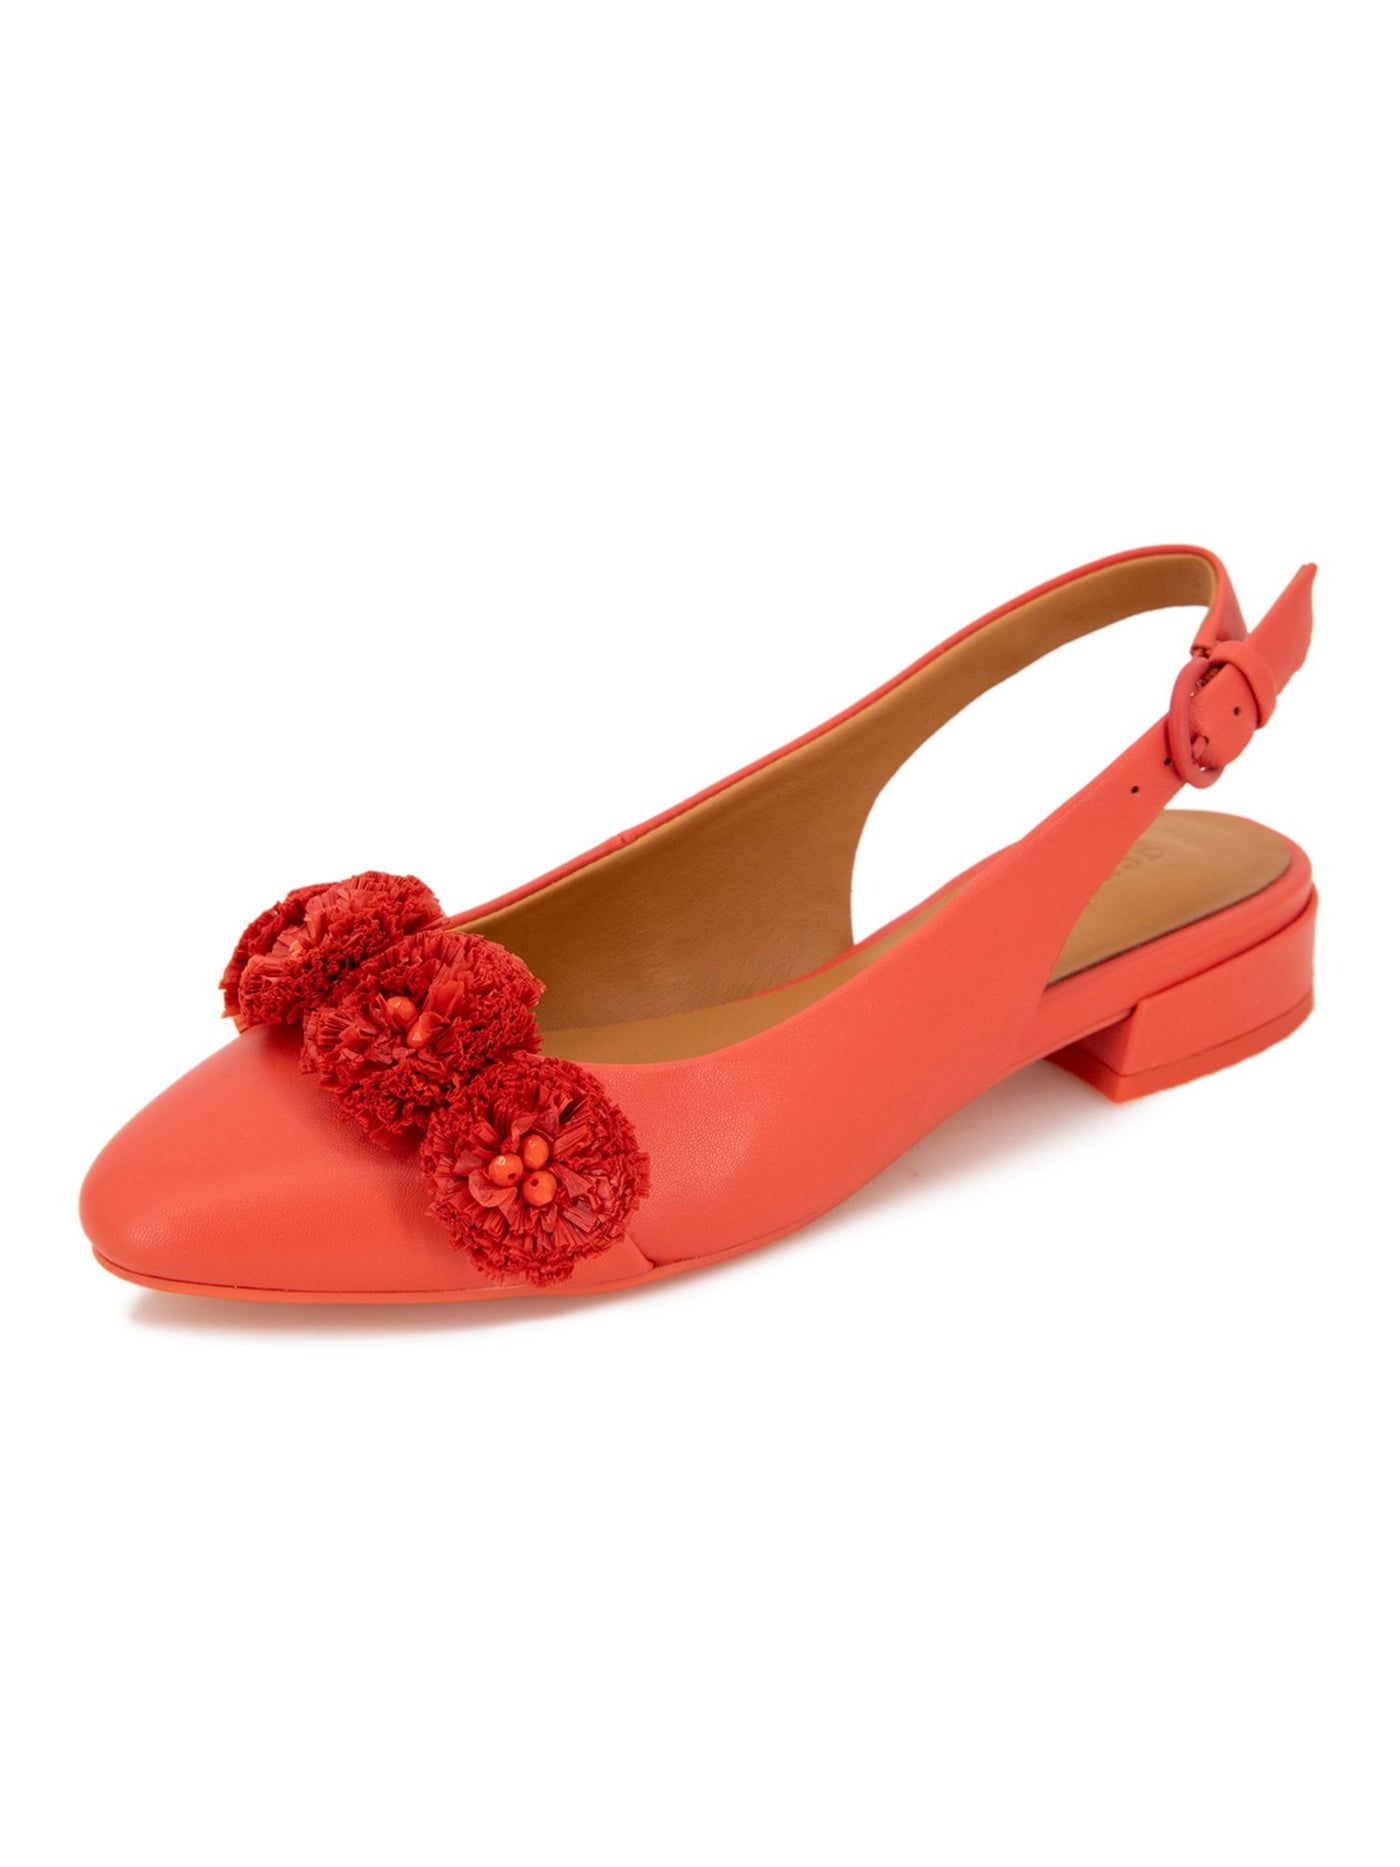 GENTLE SOULS KENNETH COLE Womens Coral Pom Pom At Vamp Cushioned Anana Pointy Toe Buckle Leather Slingback Sandal 7.5 M